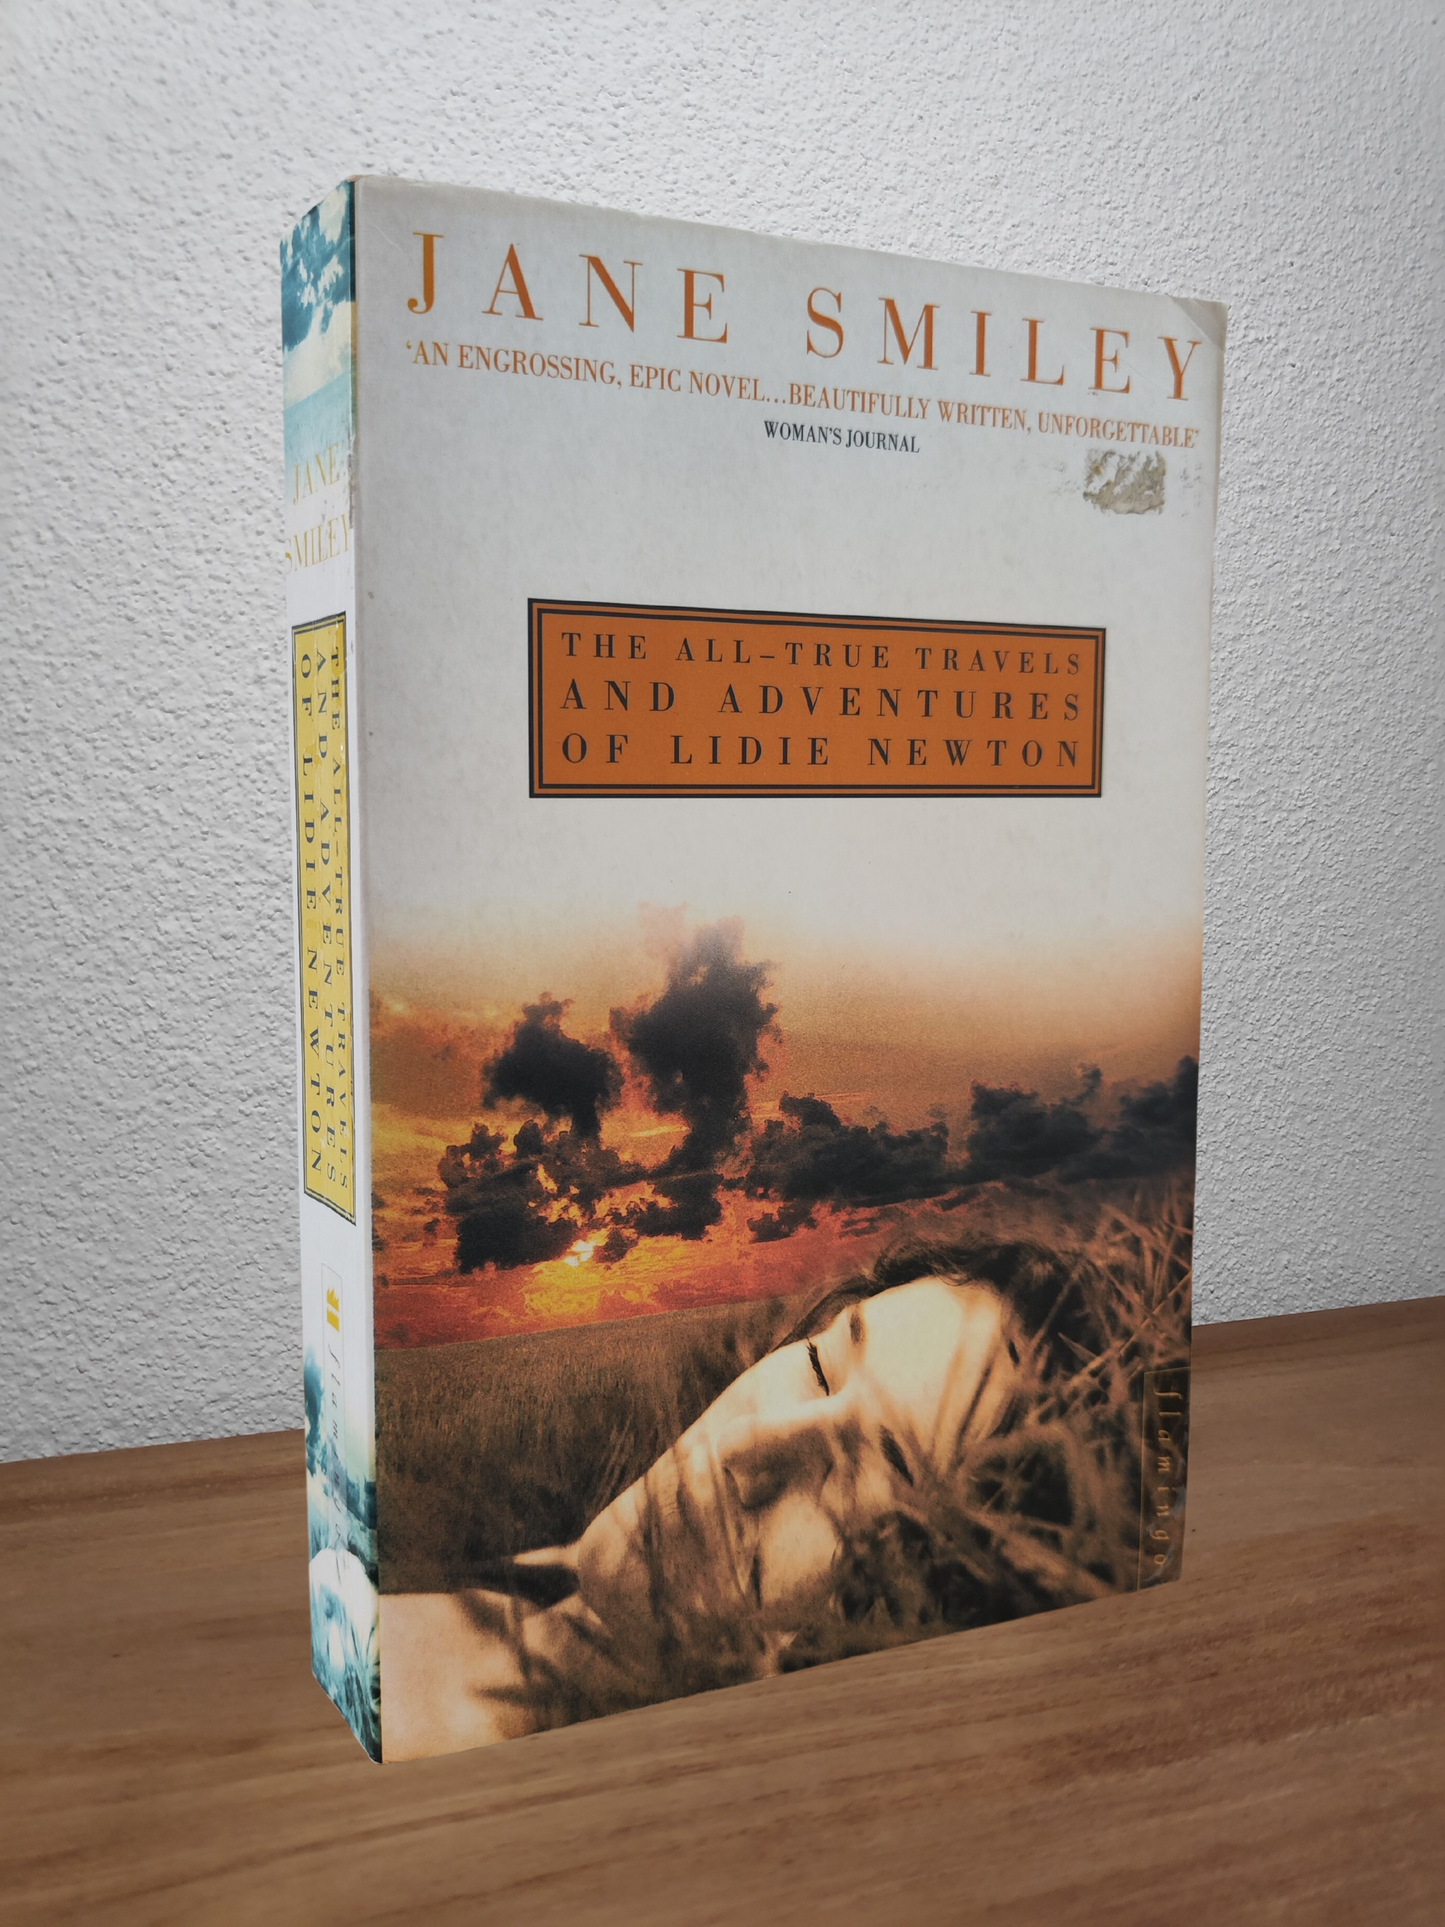 Jane Smiley - The All-true Travels and Adventures of Lidie Newton